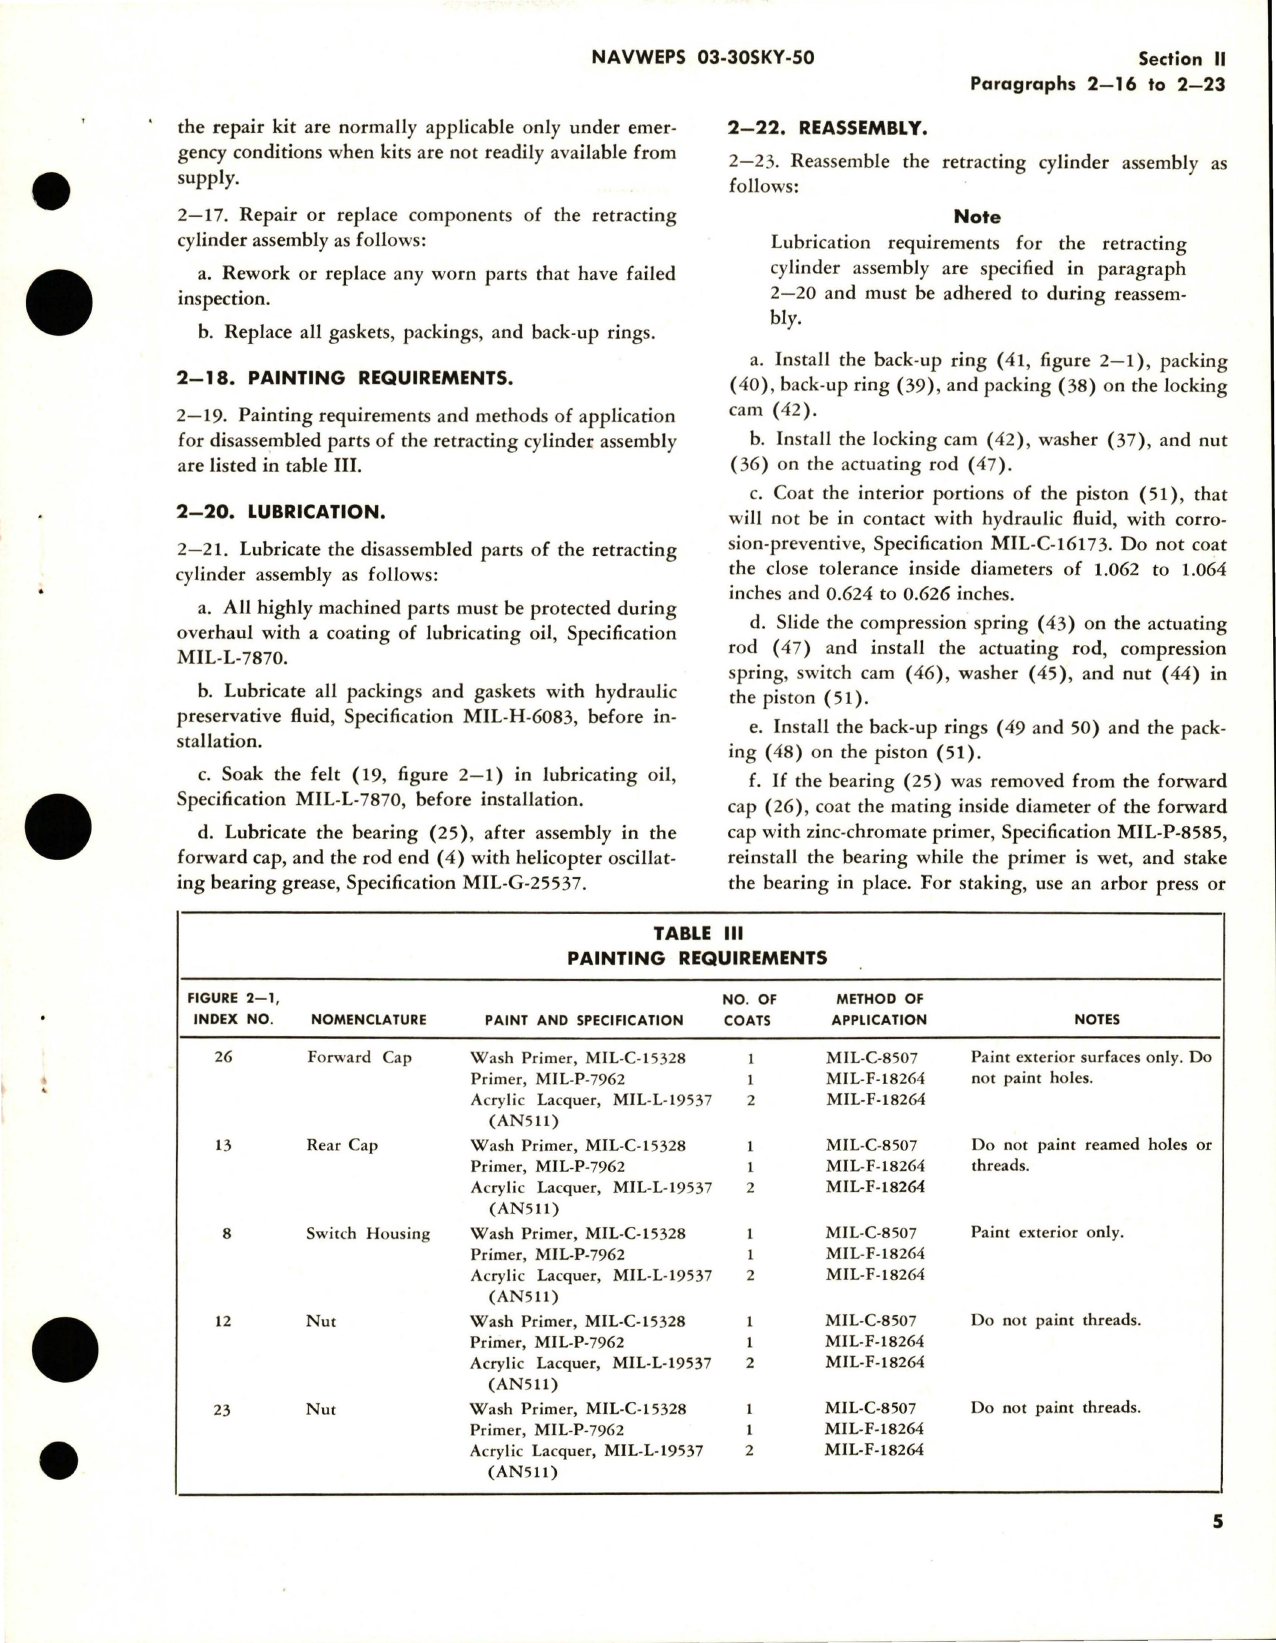 Sample page 5 from AirCorps Library document: Overhaul Instructions for Retracting Cylinder Assembly - Parts S6165-63101-3 and S6165-63101-4